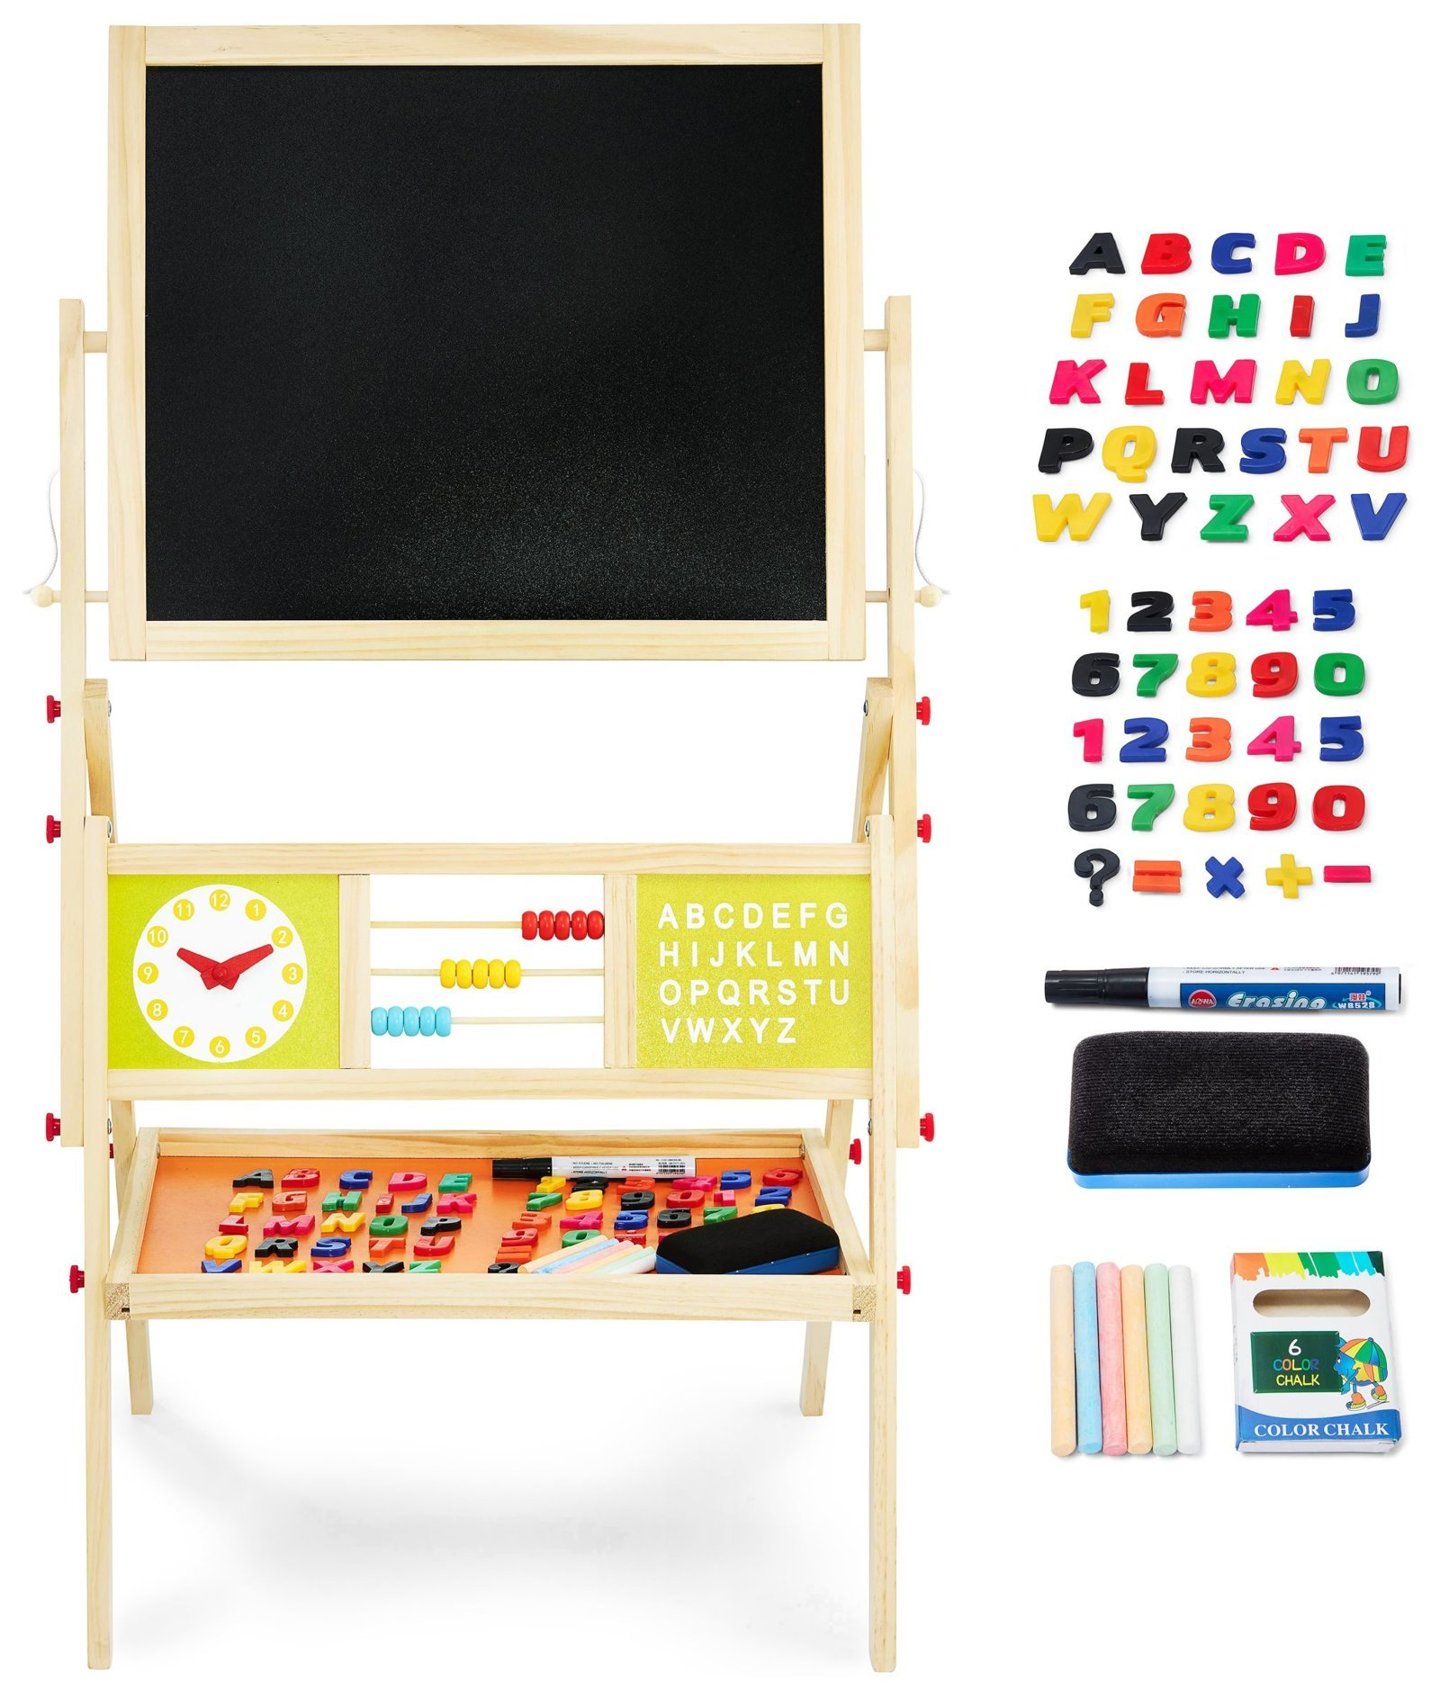 Large Educational Two-sided Board: magnetic and chalkboard - dry erasable, wooden